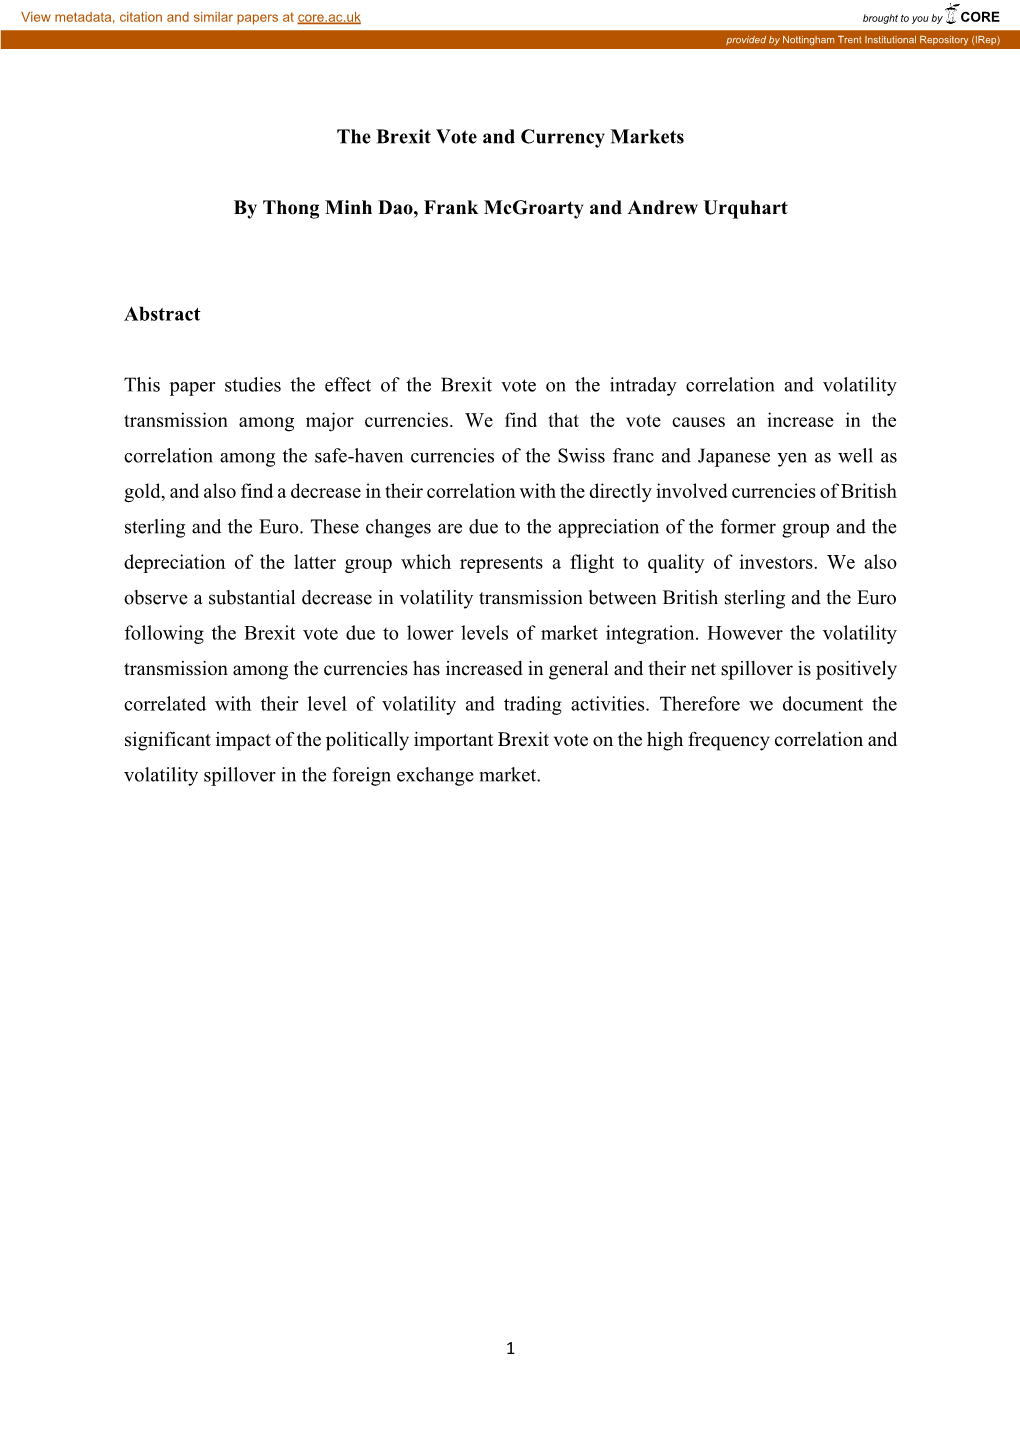 The Brexit Vote and Currency Markets by Thong Minh Dao, Frank Mcgroarty and Andrew Urquhart Abstract This Paper Studies The